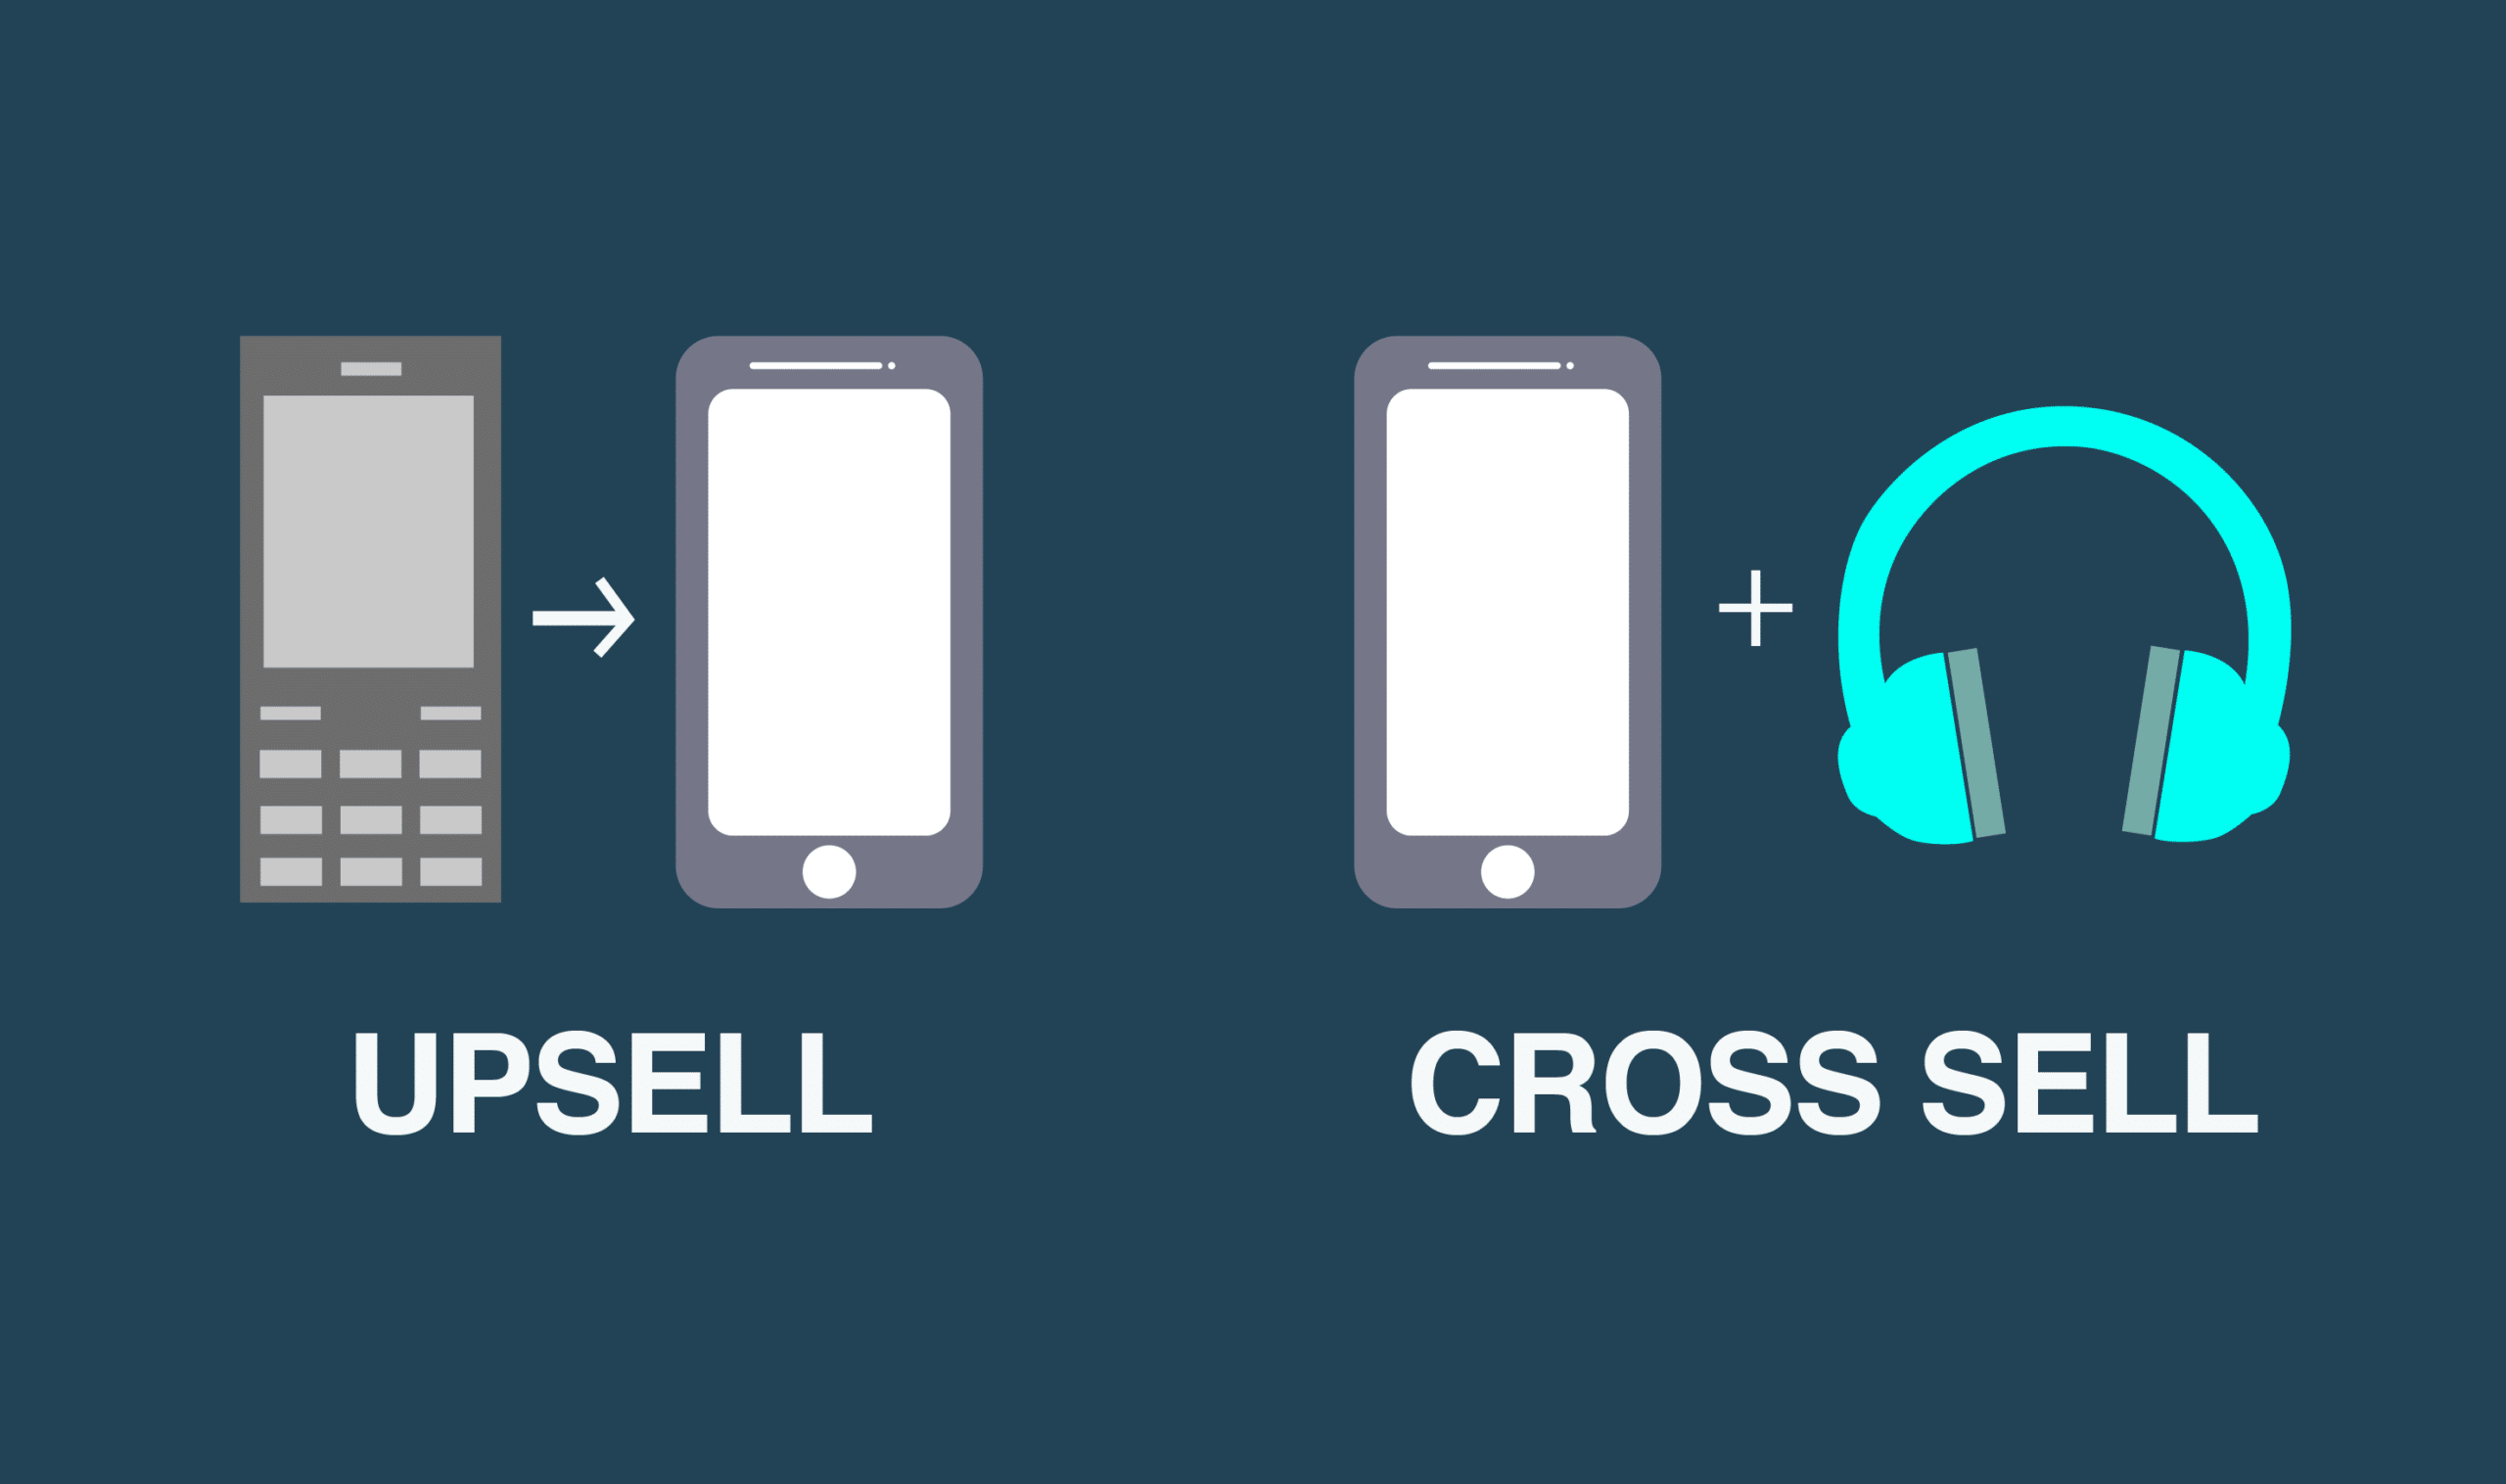 A image comparing up selling and cross selling in app marketing.